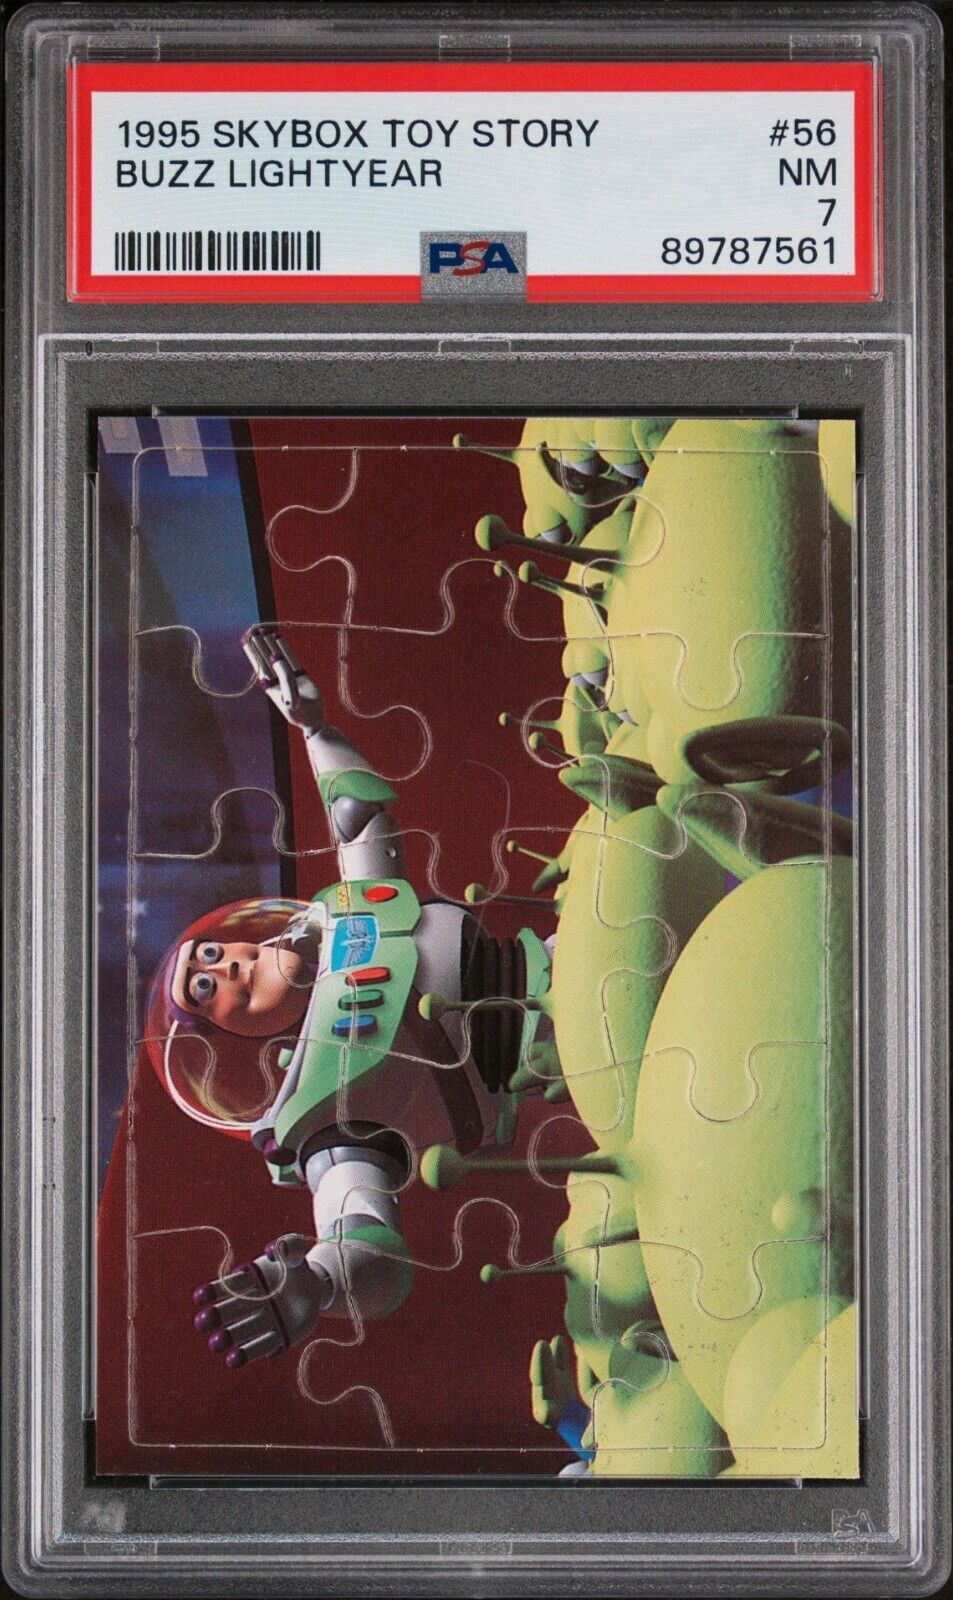 Buzz LightYear #56 1995 Skybox Disney Toy Story RC Puzzle PSA 7 NM only 1 higher